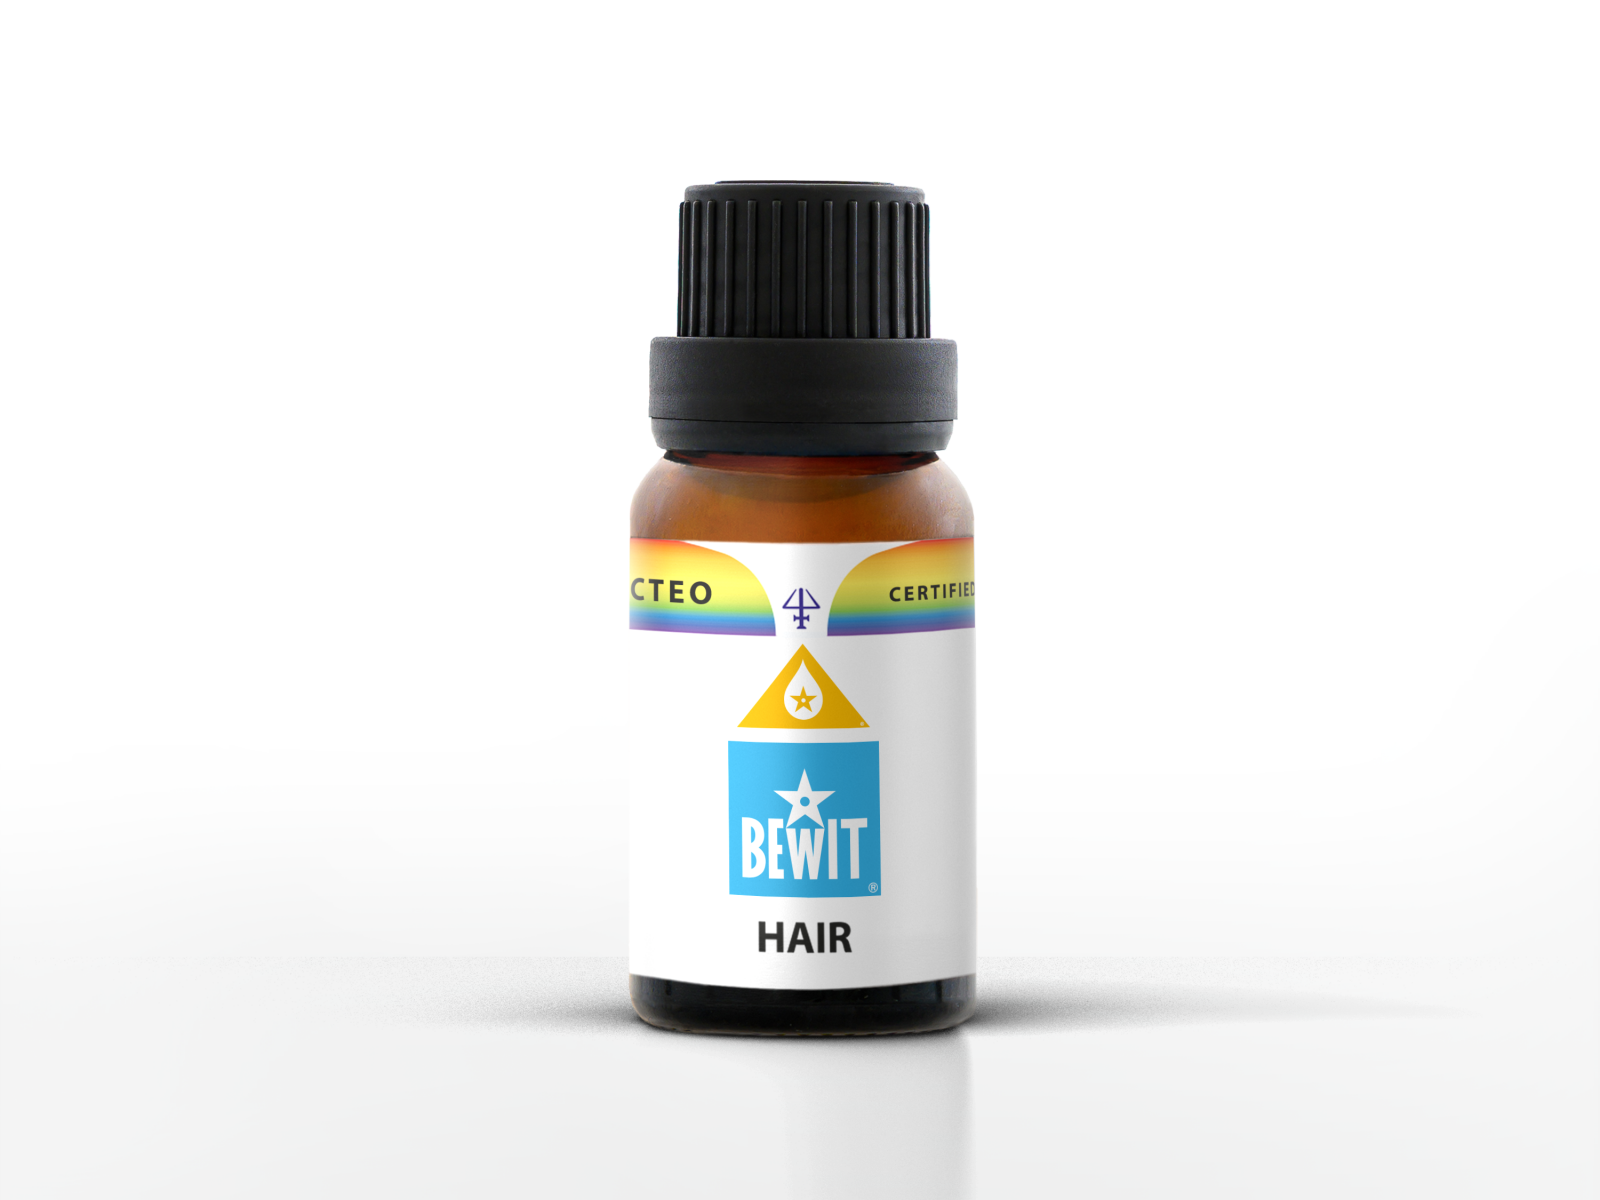 BEWIT HAIR - 100% natural essential oil blend in CTEO® quality - 1